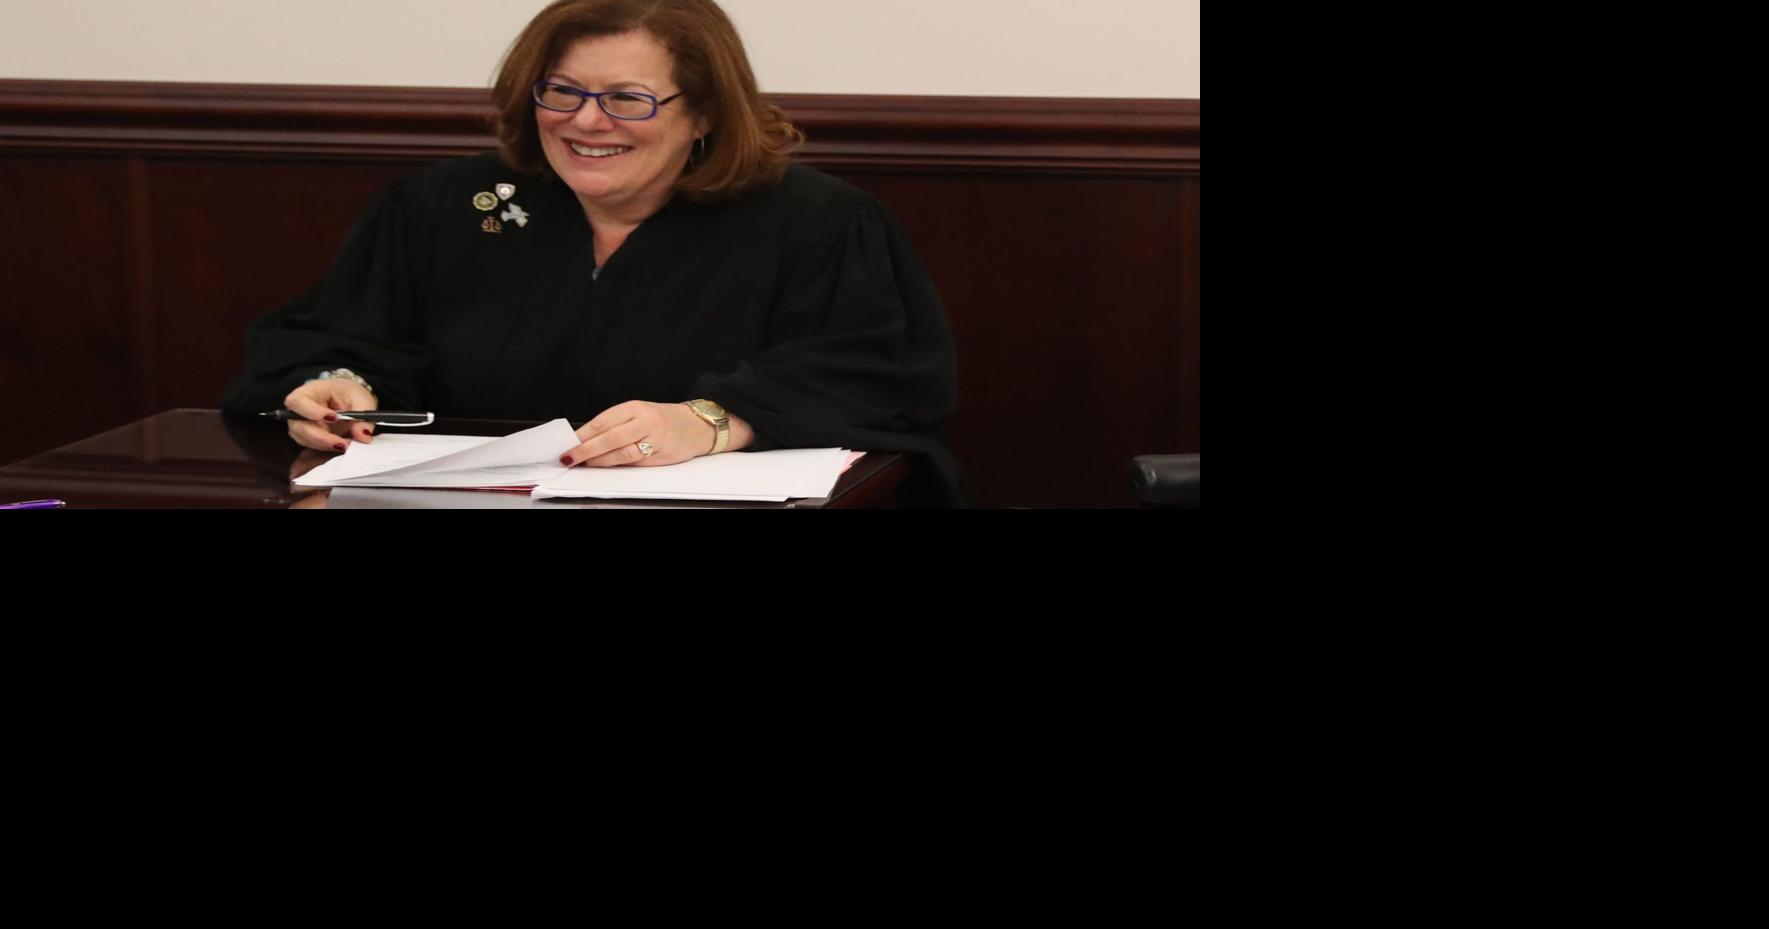 Judge Bloch Rodwin honored for work on behalf of crime victims